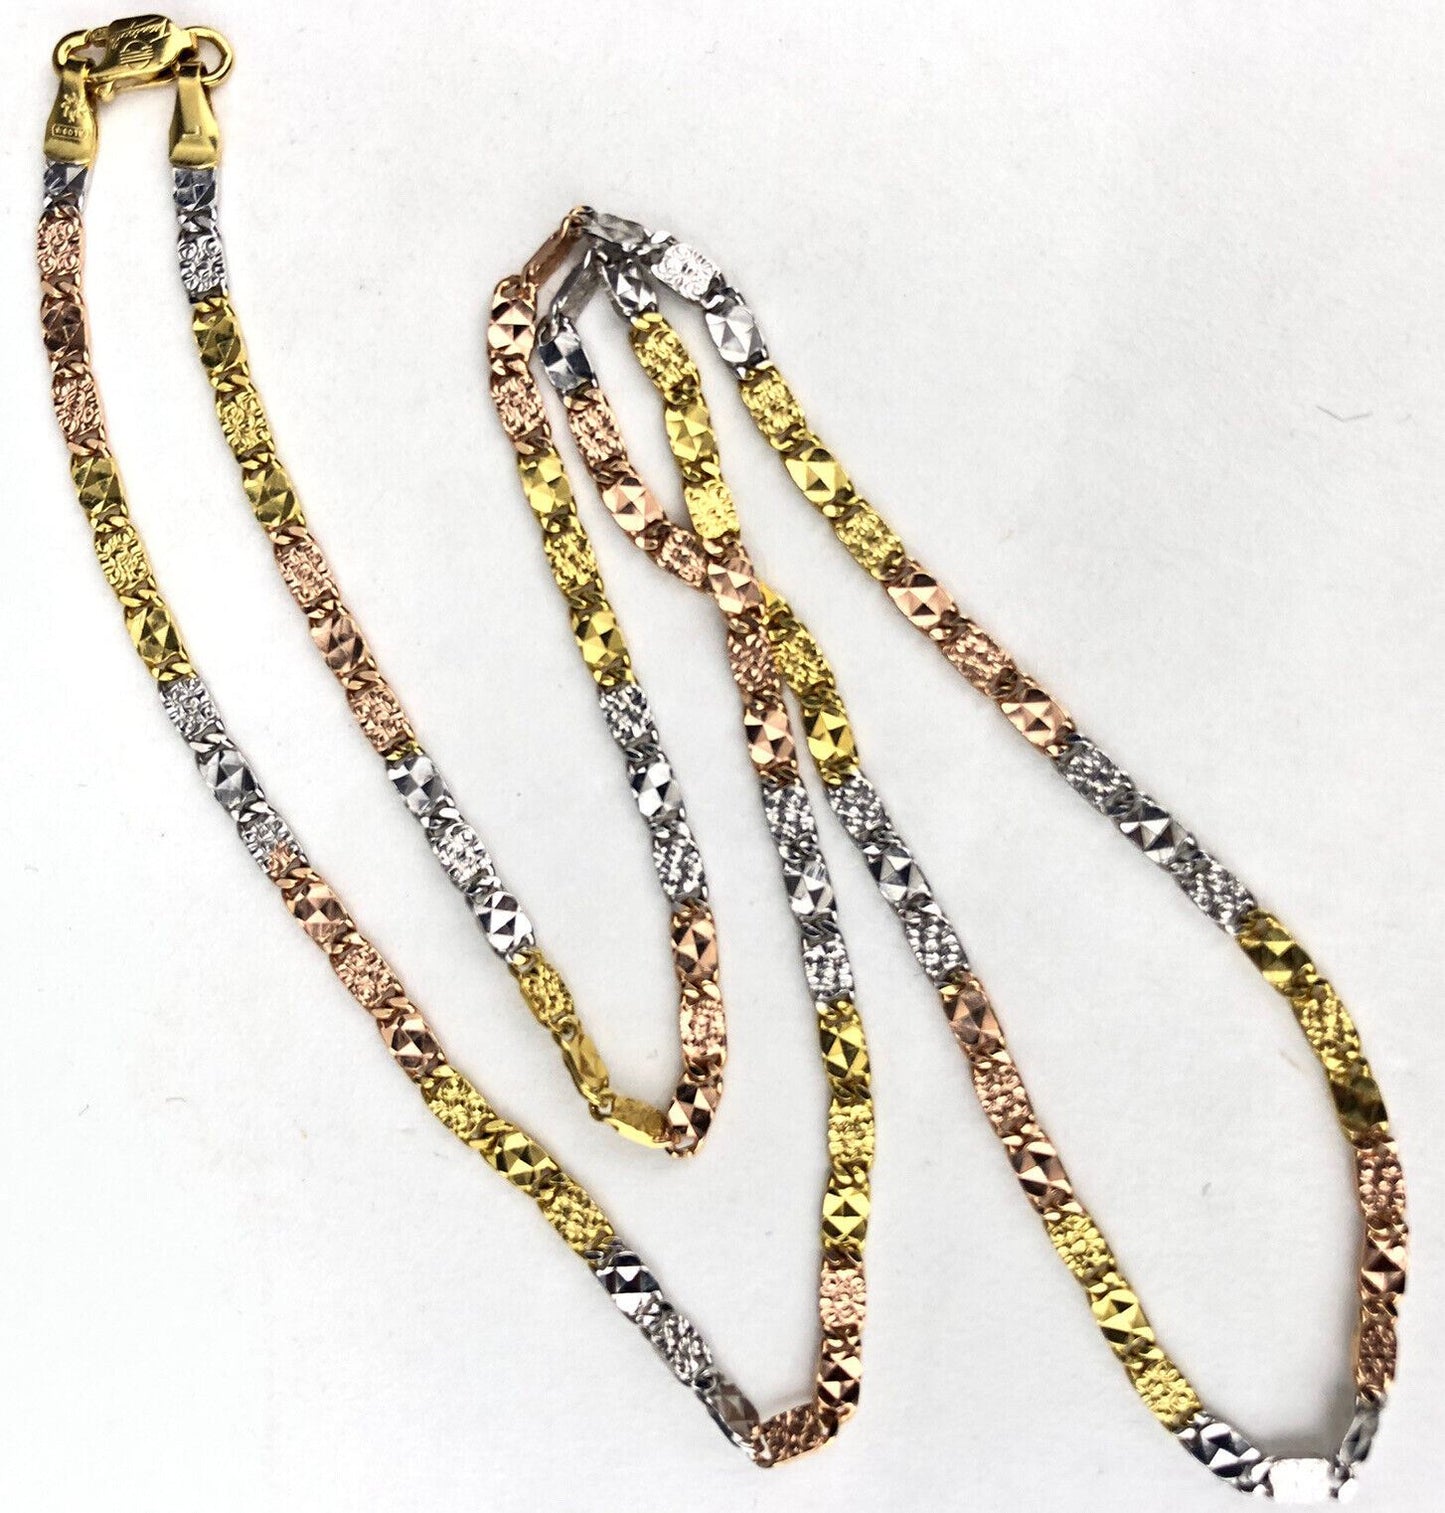 Tecnigold 18k ROSE YELLOW & WHITE GOLD Tri-Tone Flat Fancy Link Necklace Chain